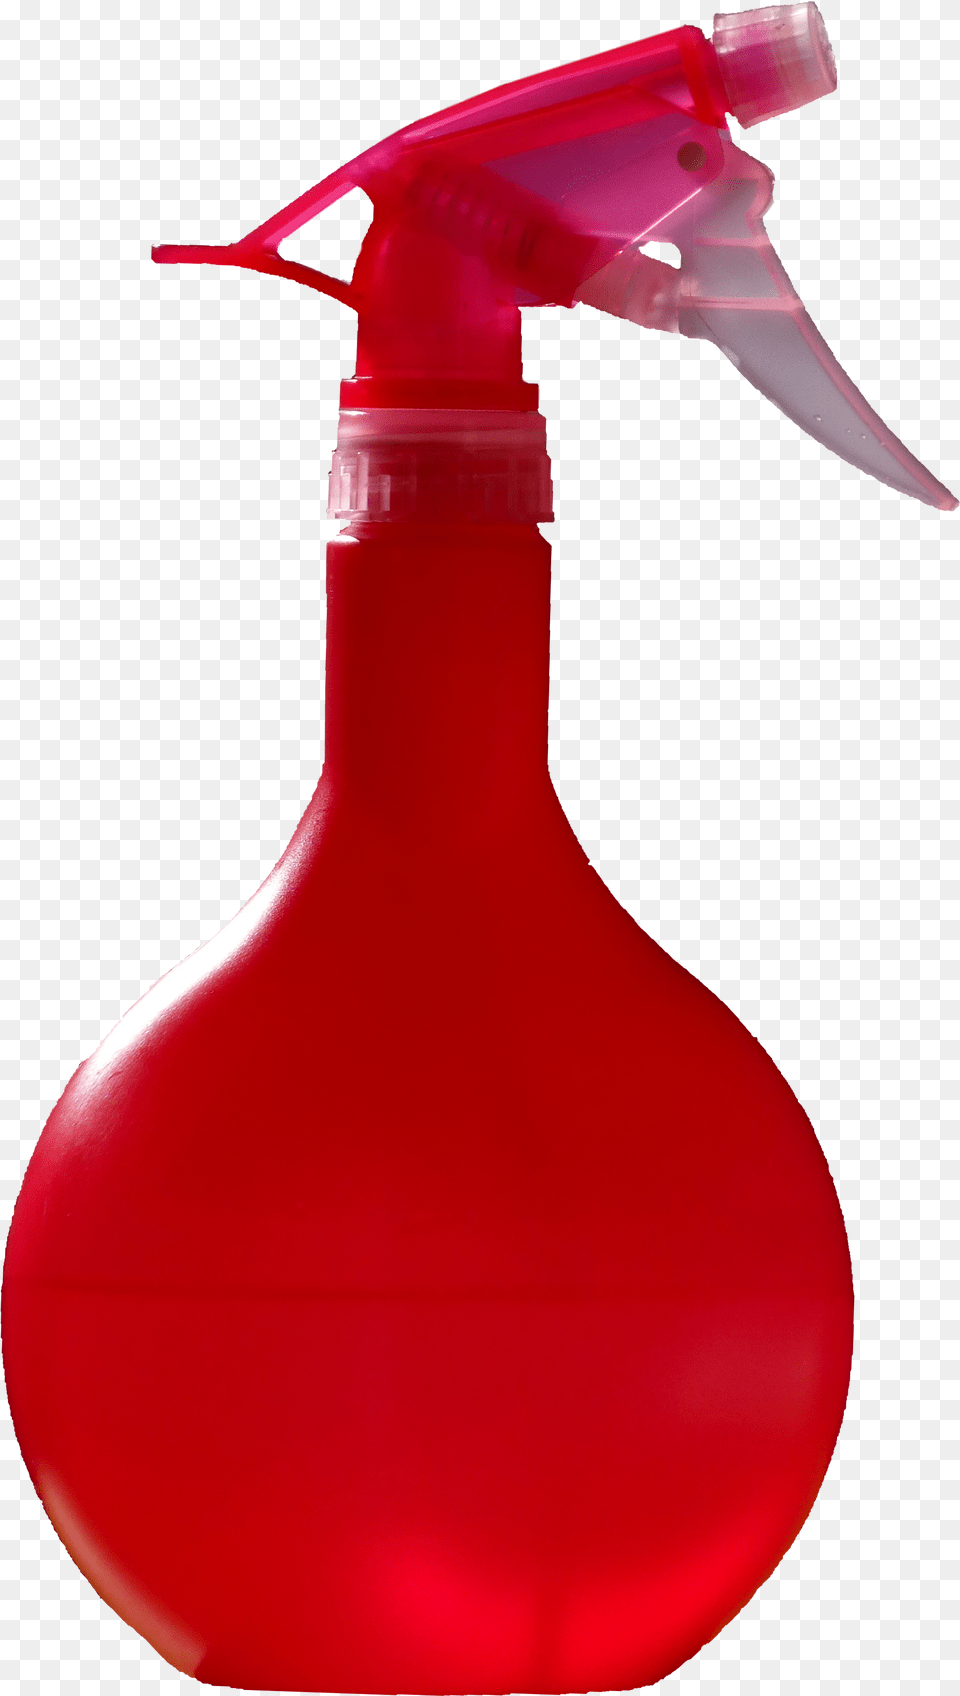 Filered Spray Bottle Wikimedia Commons Red Spray Bottle, Can, Spray Can, Tin Free Transparent Png